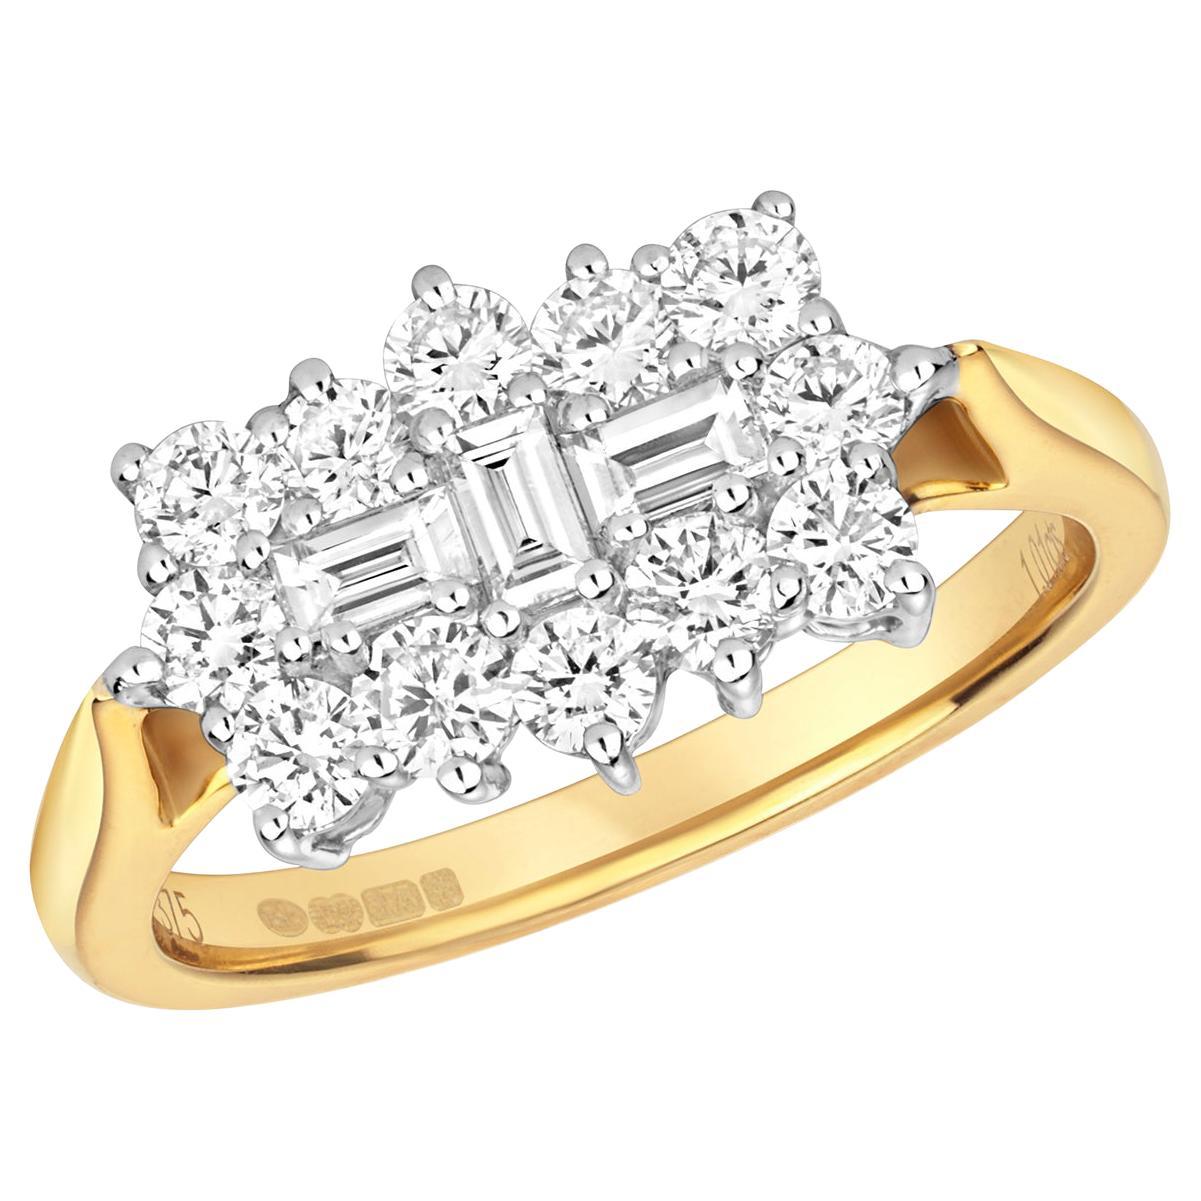 1ct DIAMOND ROUND AND BAGUETTE CLUSTER BOAT RING IN 9CT GOLD For Sale